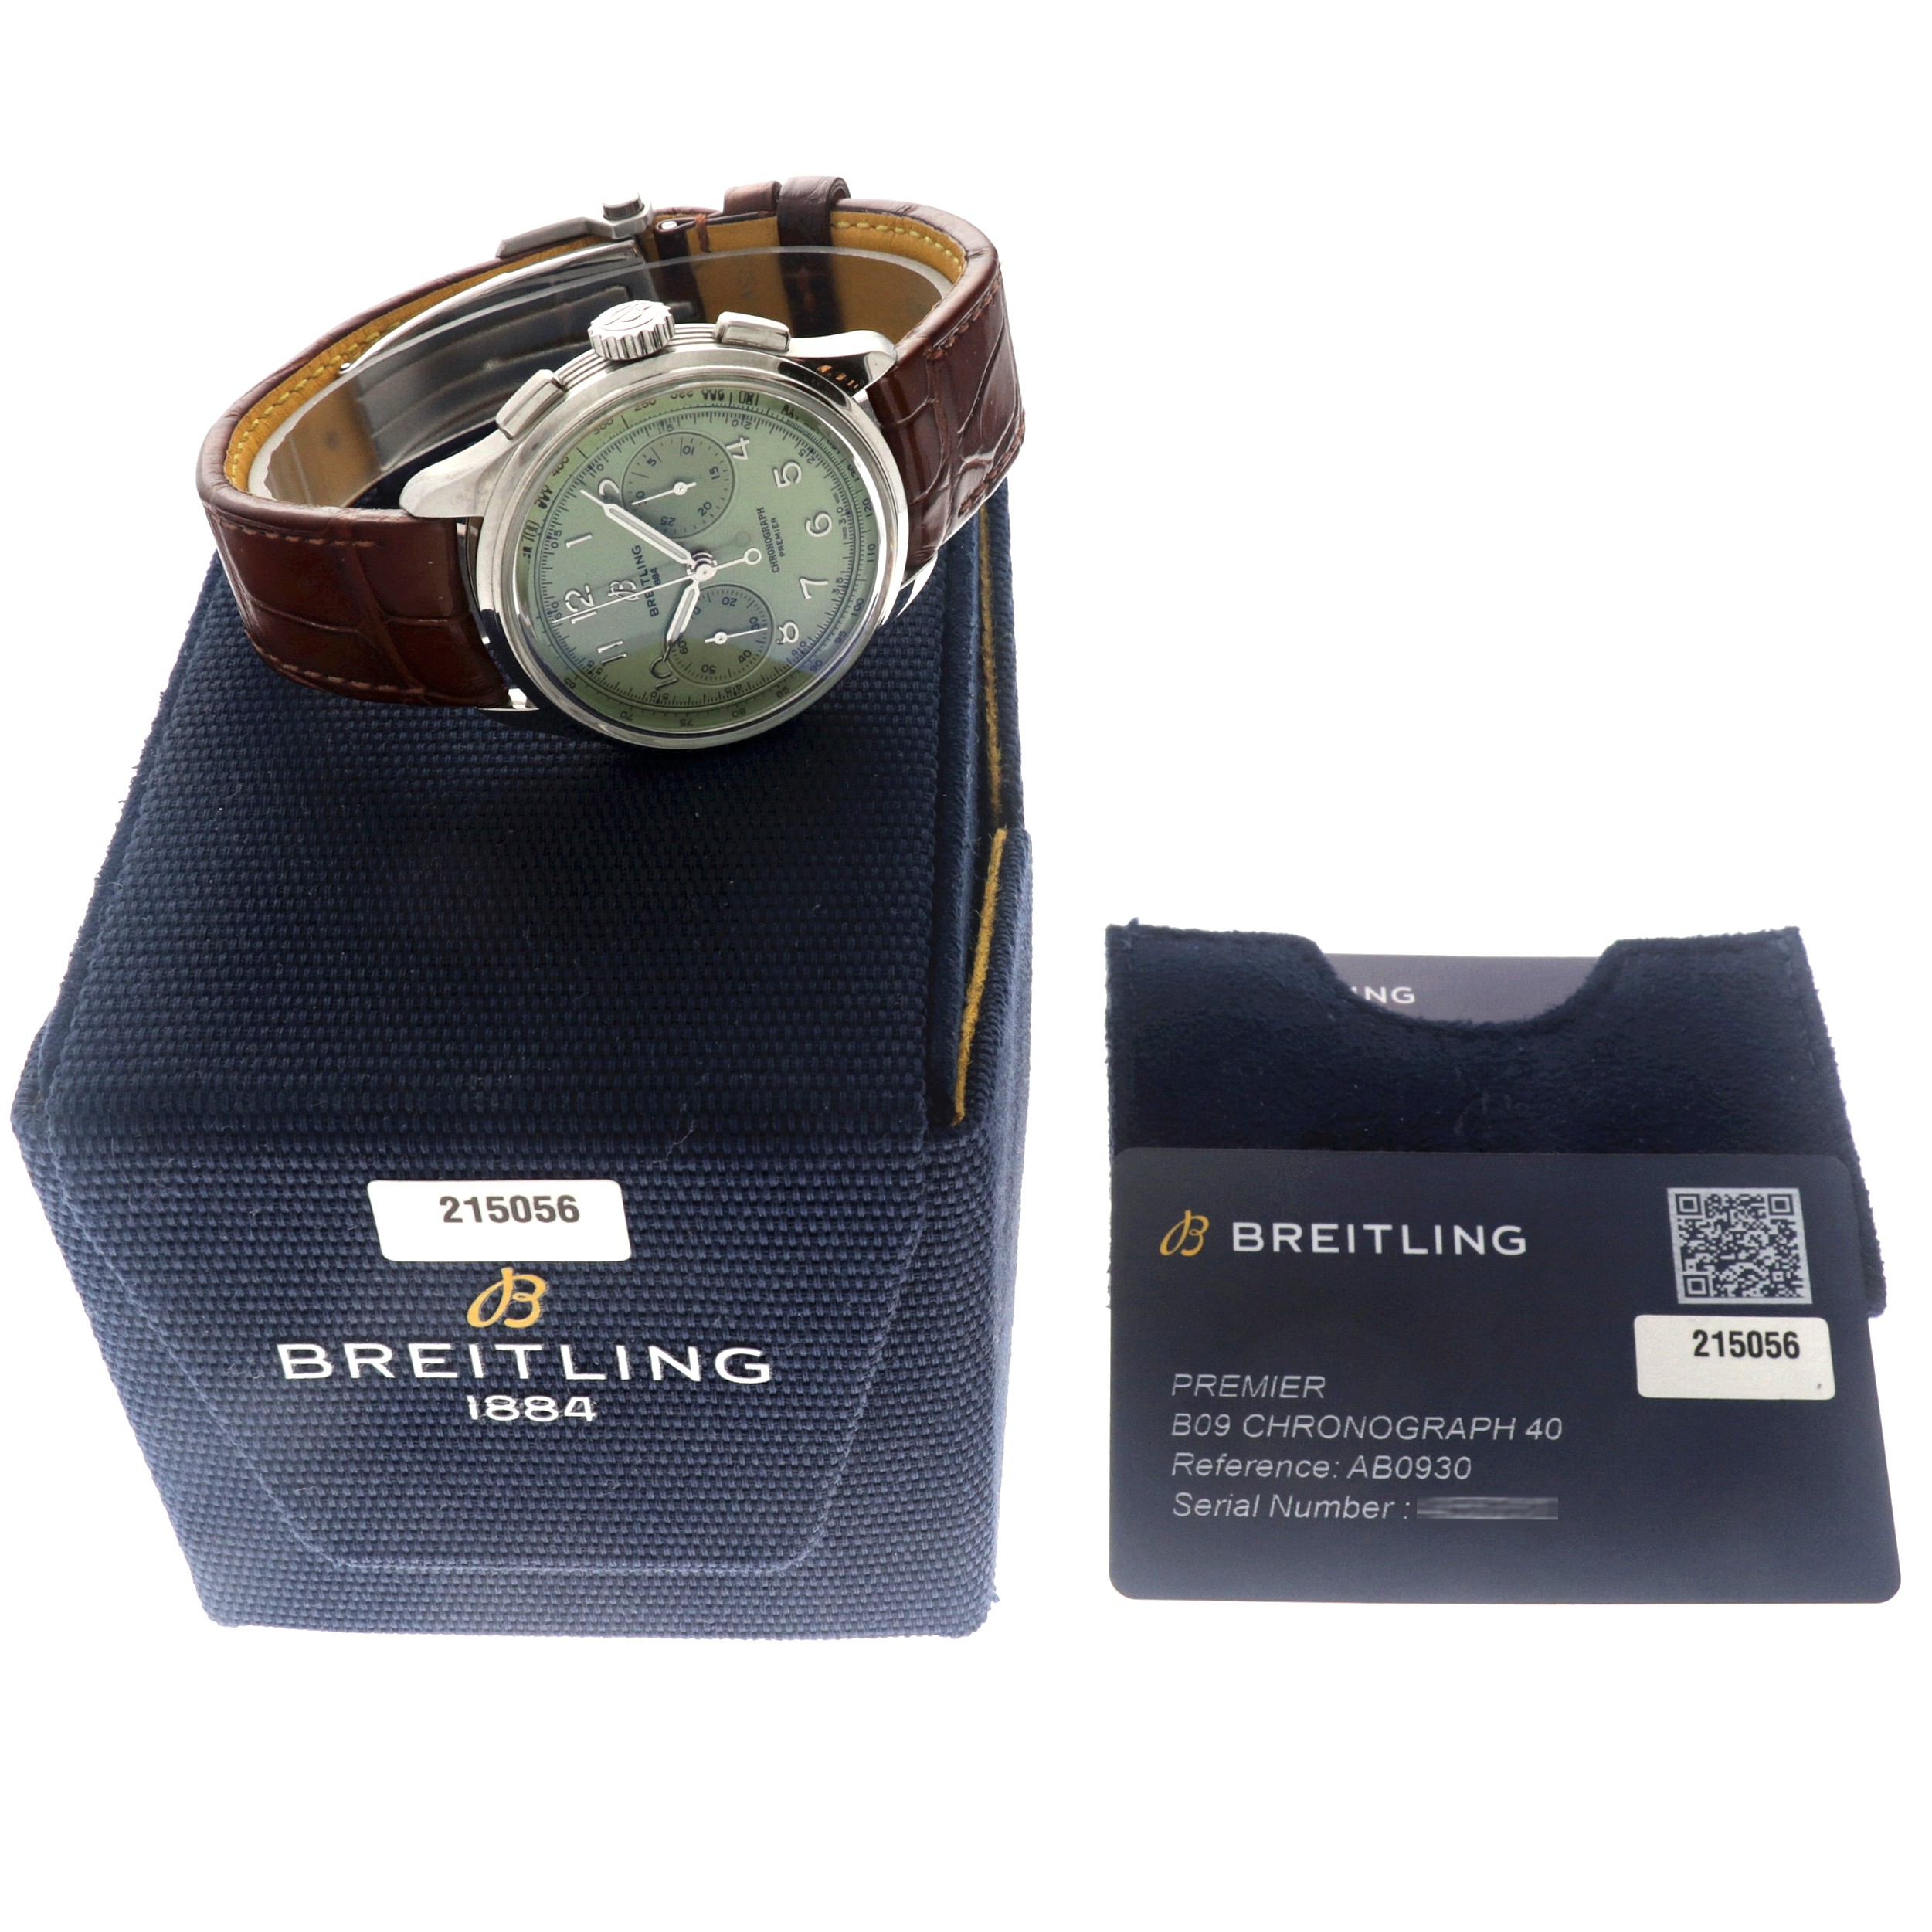 No Reserve - Breitling Premier B09 Chronograph AB0930 - Men's watch.  - Image 6 of 6